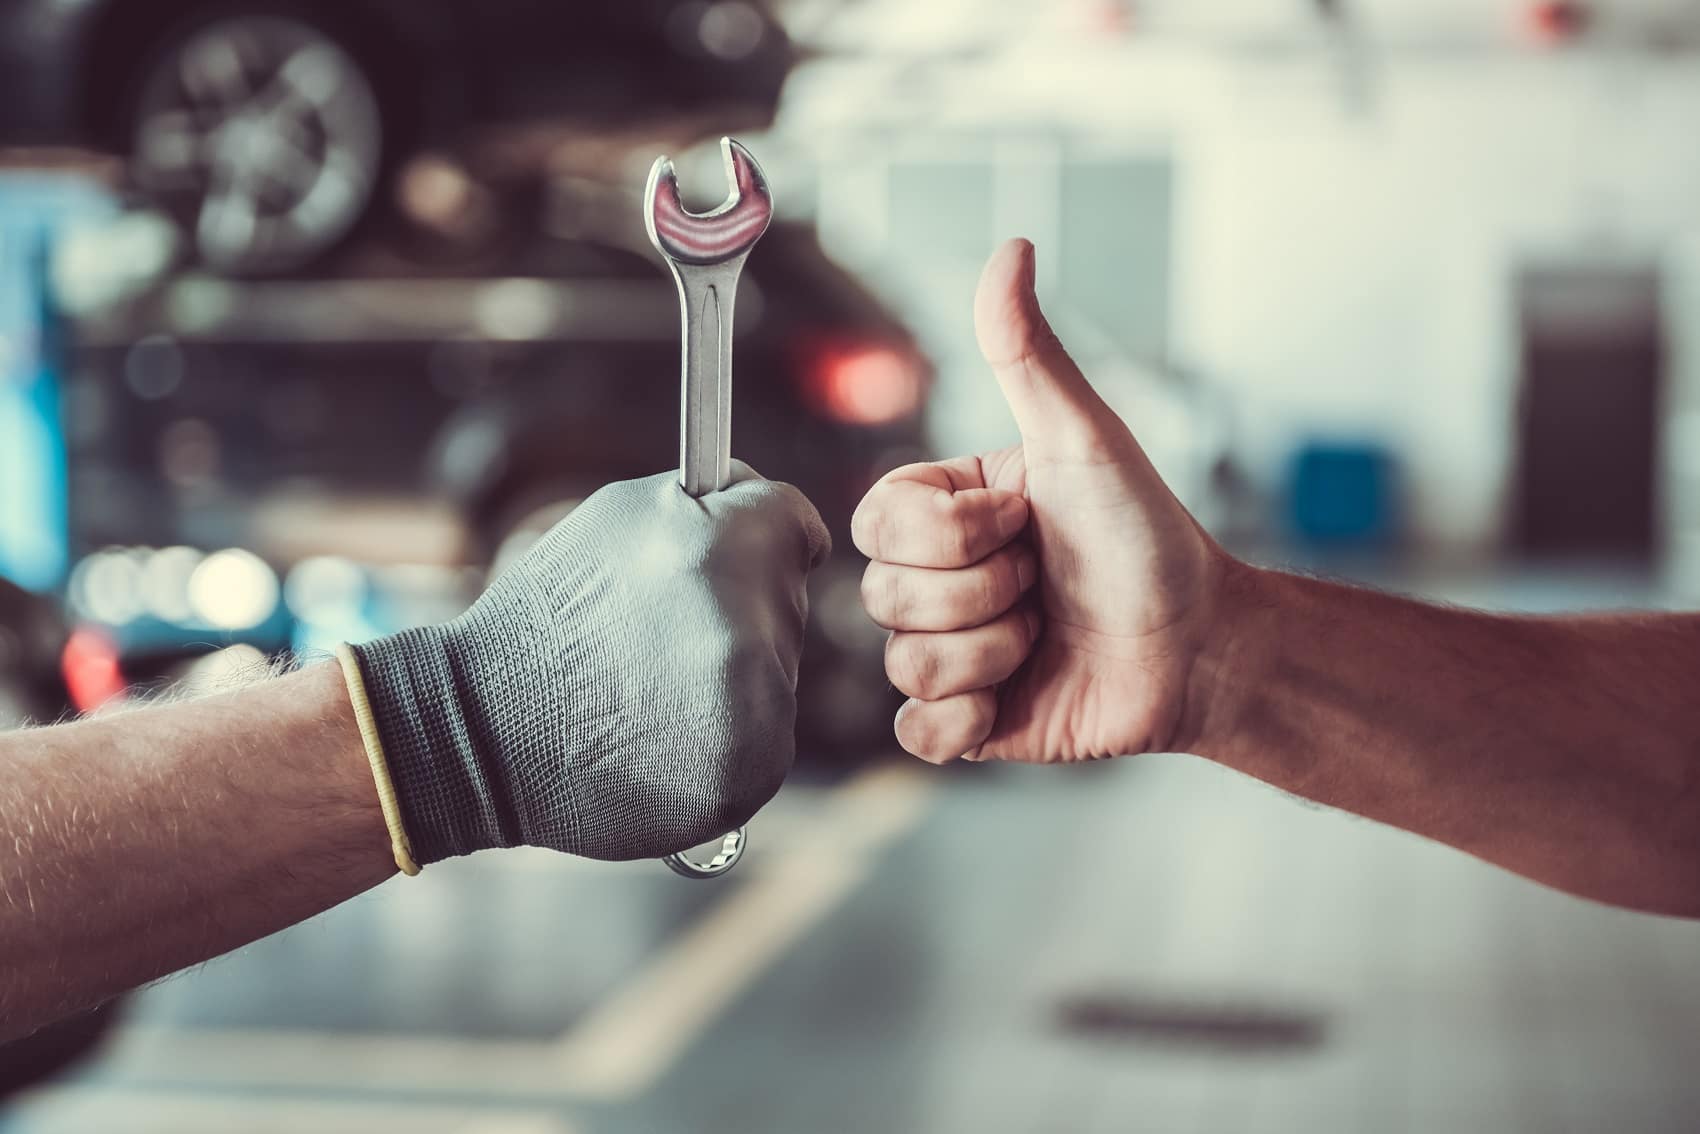 Technician Giving a Thumbs Up